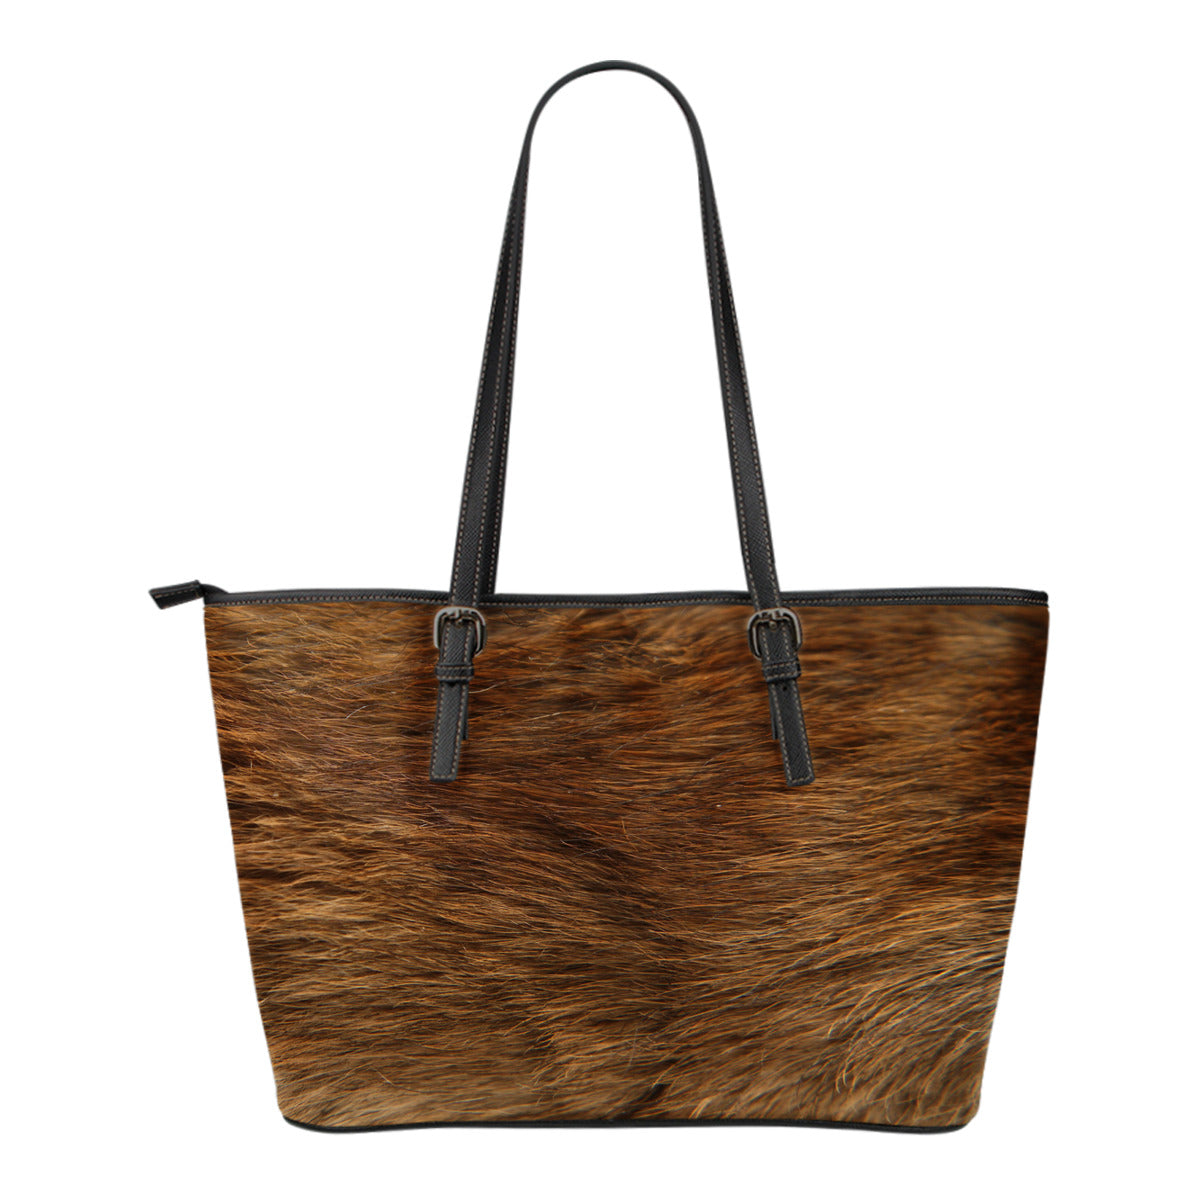 Animal Skin Texture Themed Design C12 Women Small Leather Tote Bag